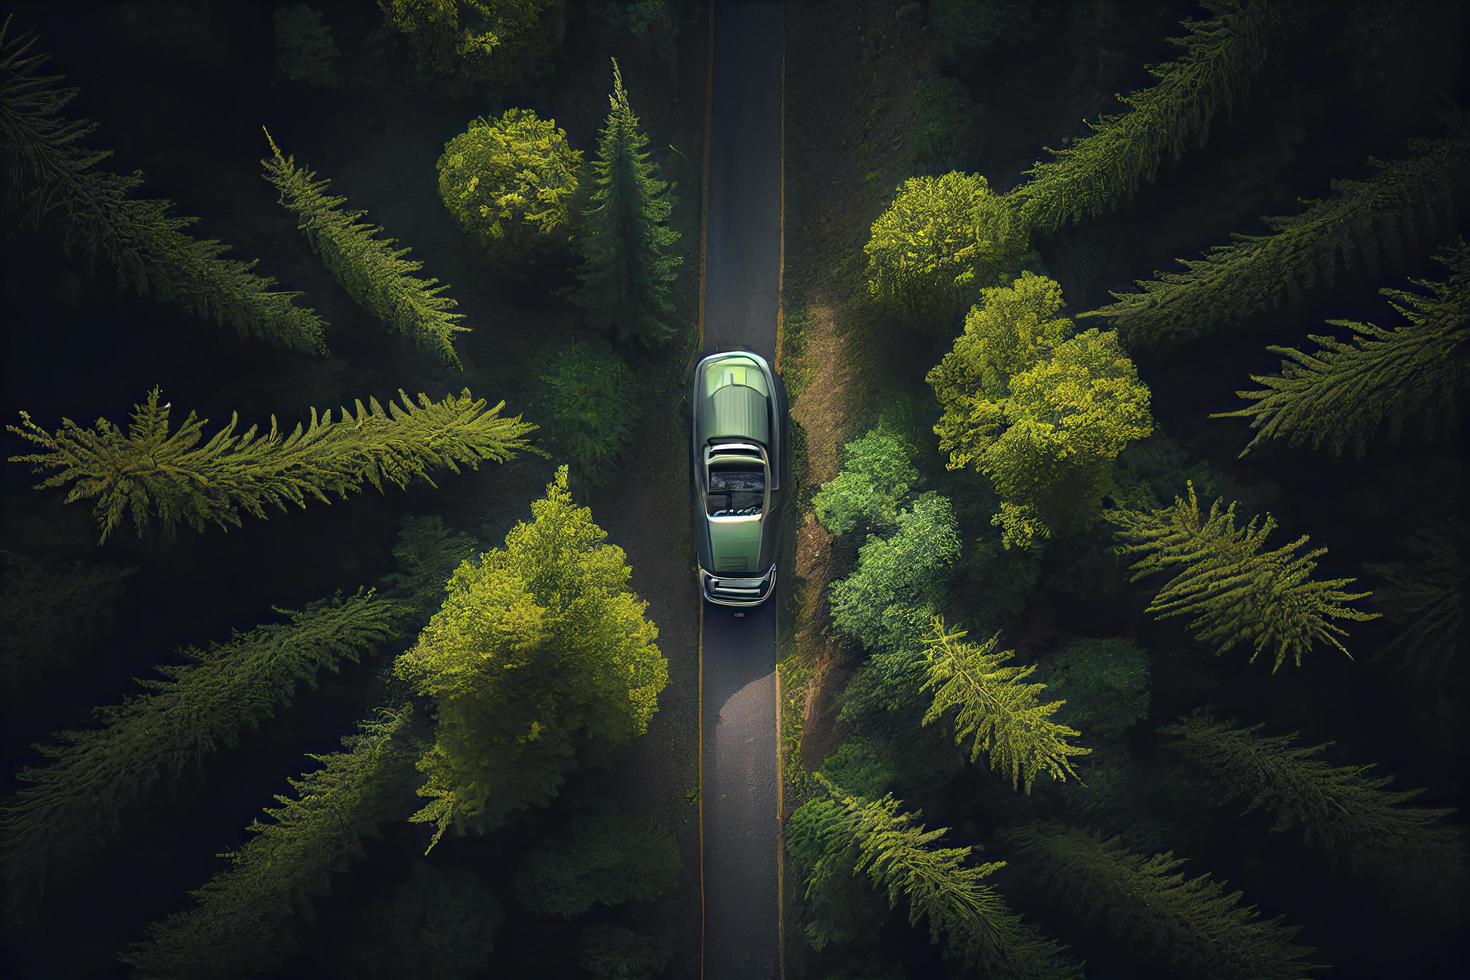 car driving on a curvy road on a mountain in a forrest photo